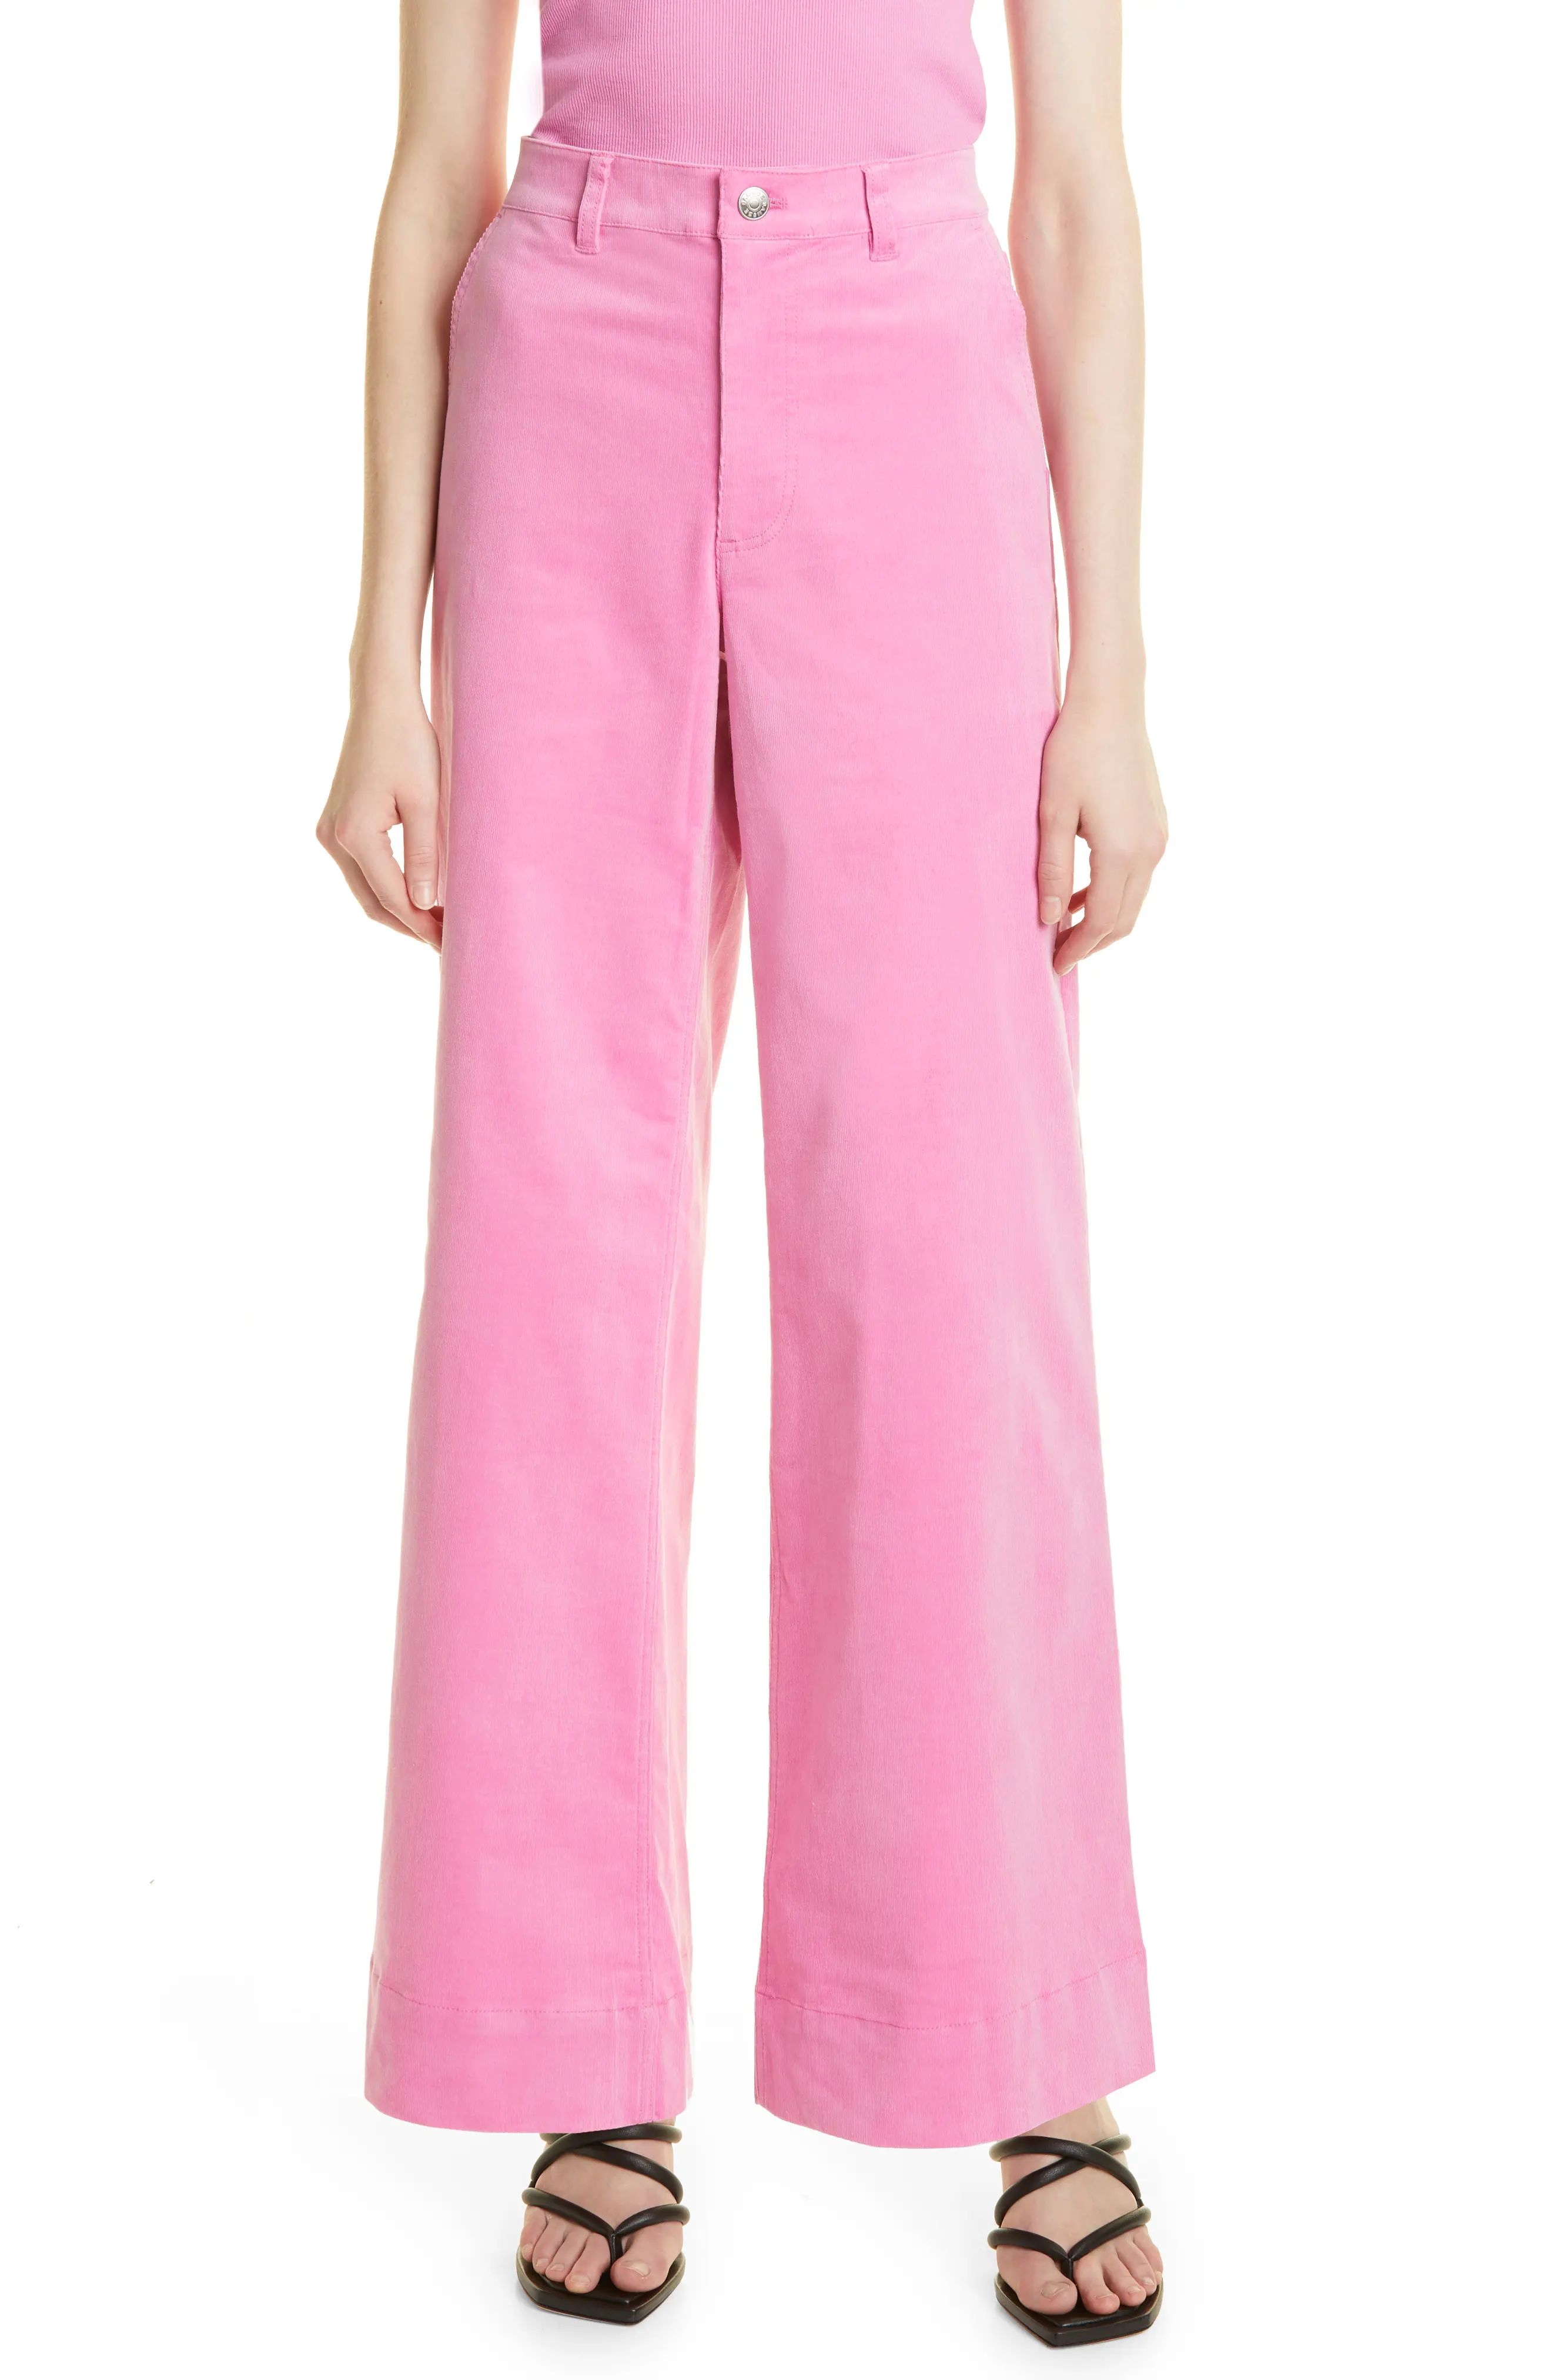 Sams?e Sams?e Allie Wide Leg Stretch Cotton Pants in Bubble Gum Pink at Nordstrom, Size Large | Nordstrom